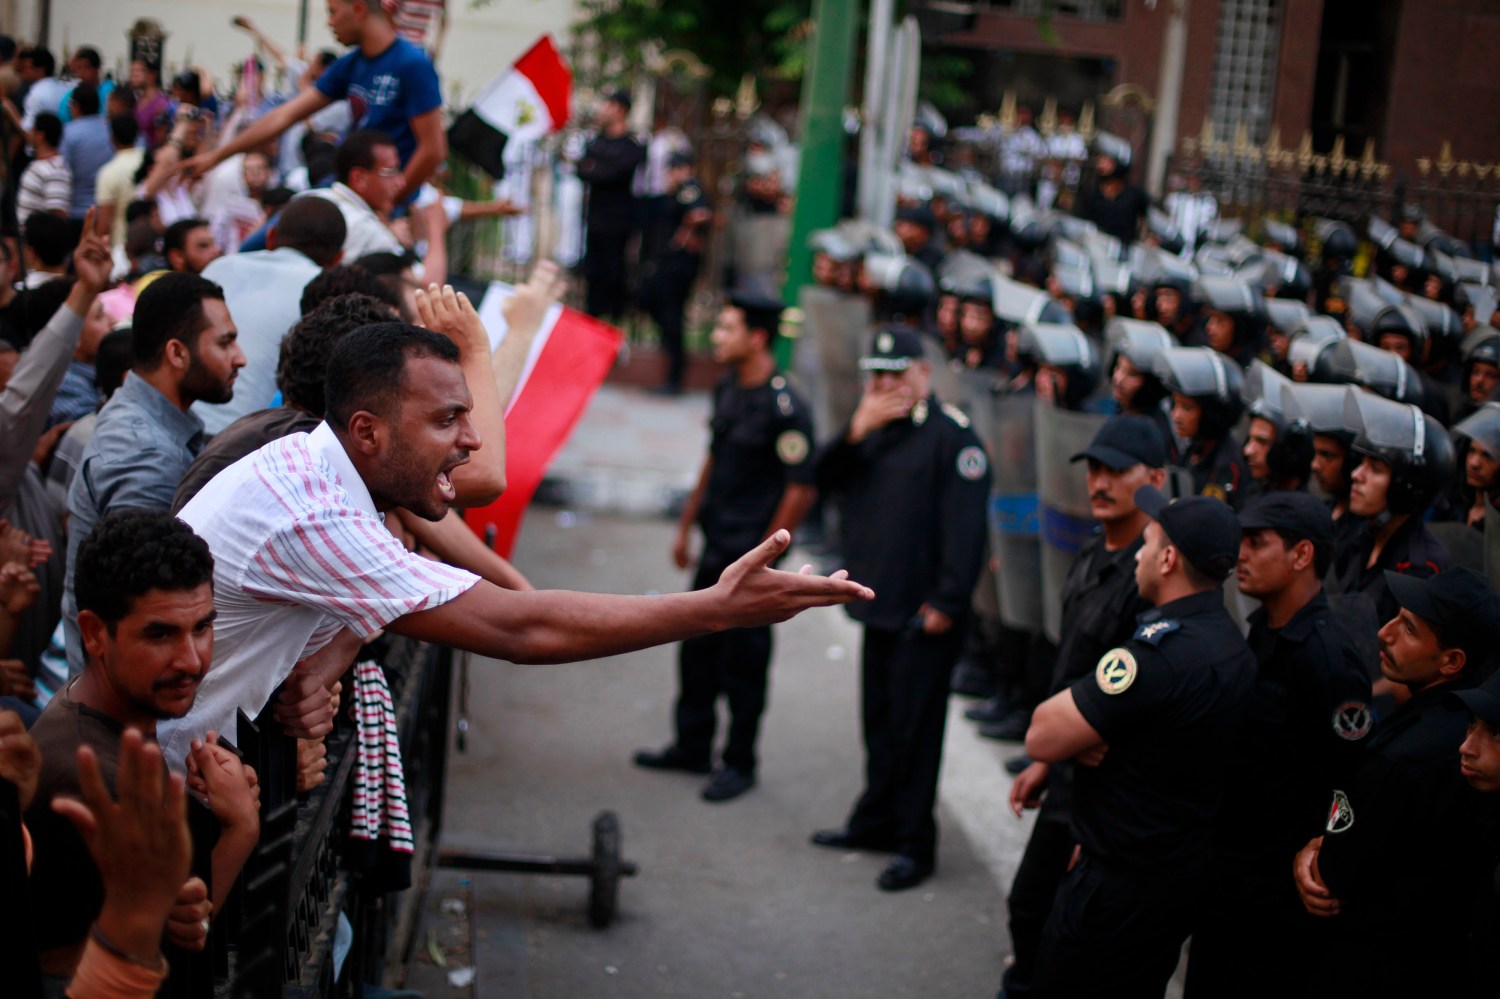 Protester shouts at police as they guard during a protest against the military council outside Egypt's parliament in Cairo